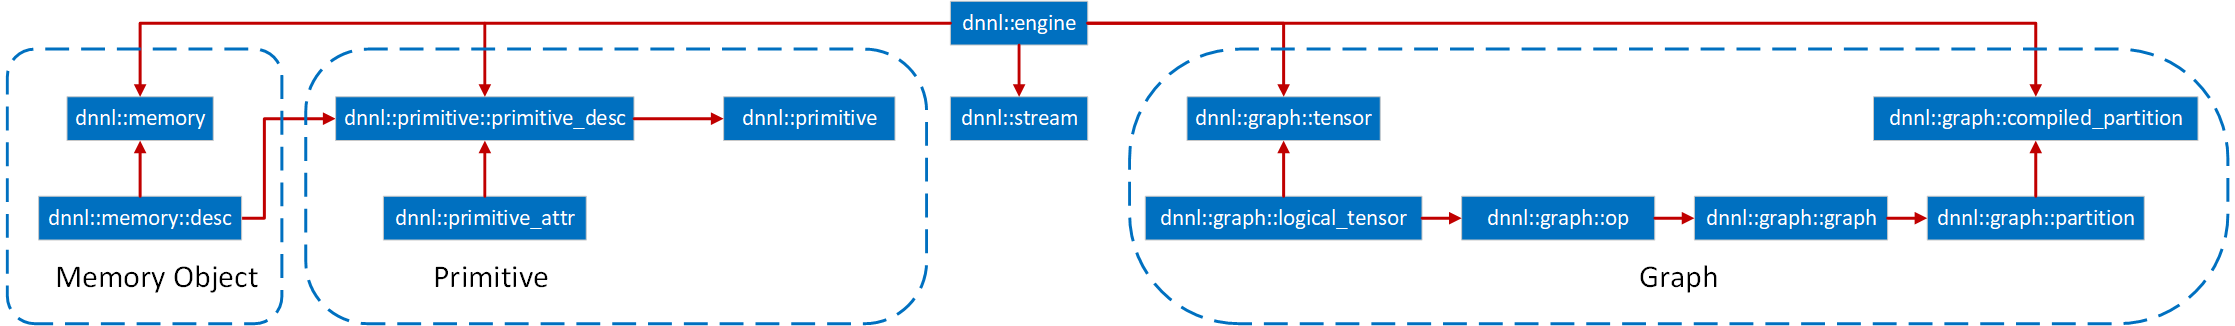 Figure 1: Overview of Graph API programming model. Blue rectangles denote oneDNN objects, and red lines denote dependencies between objects.